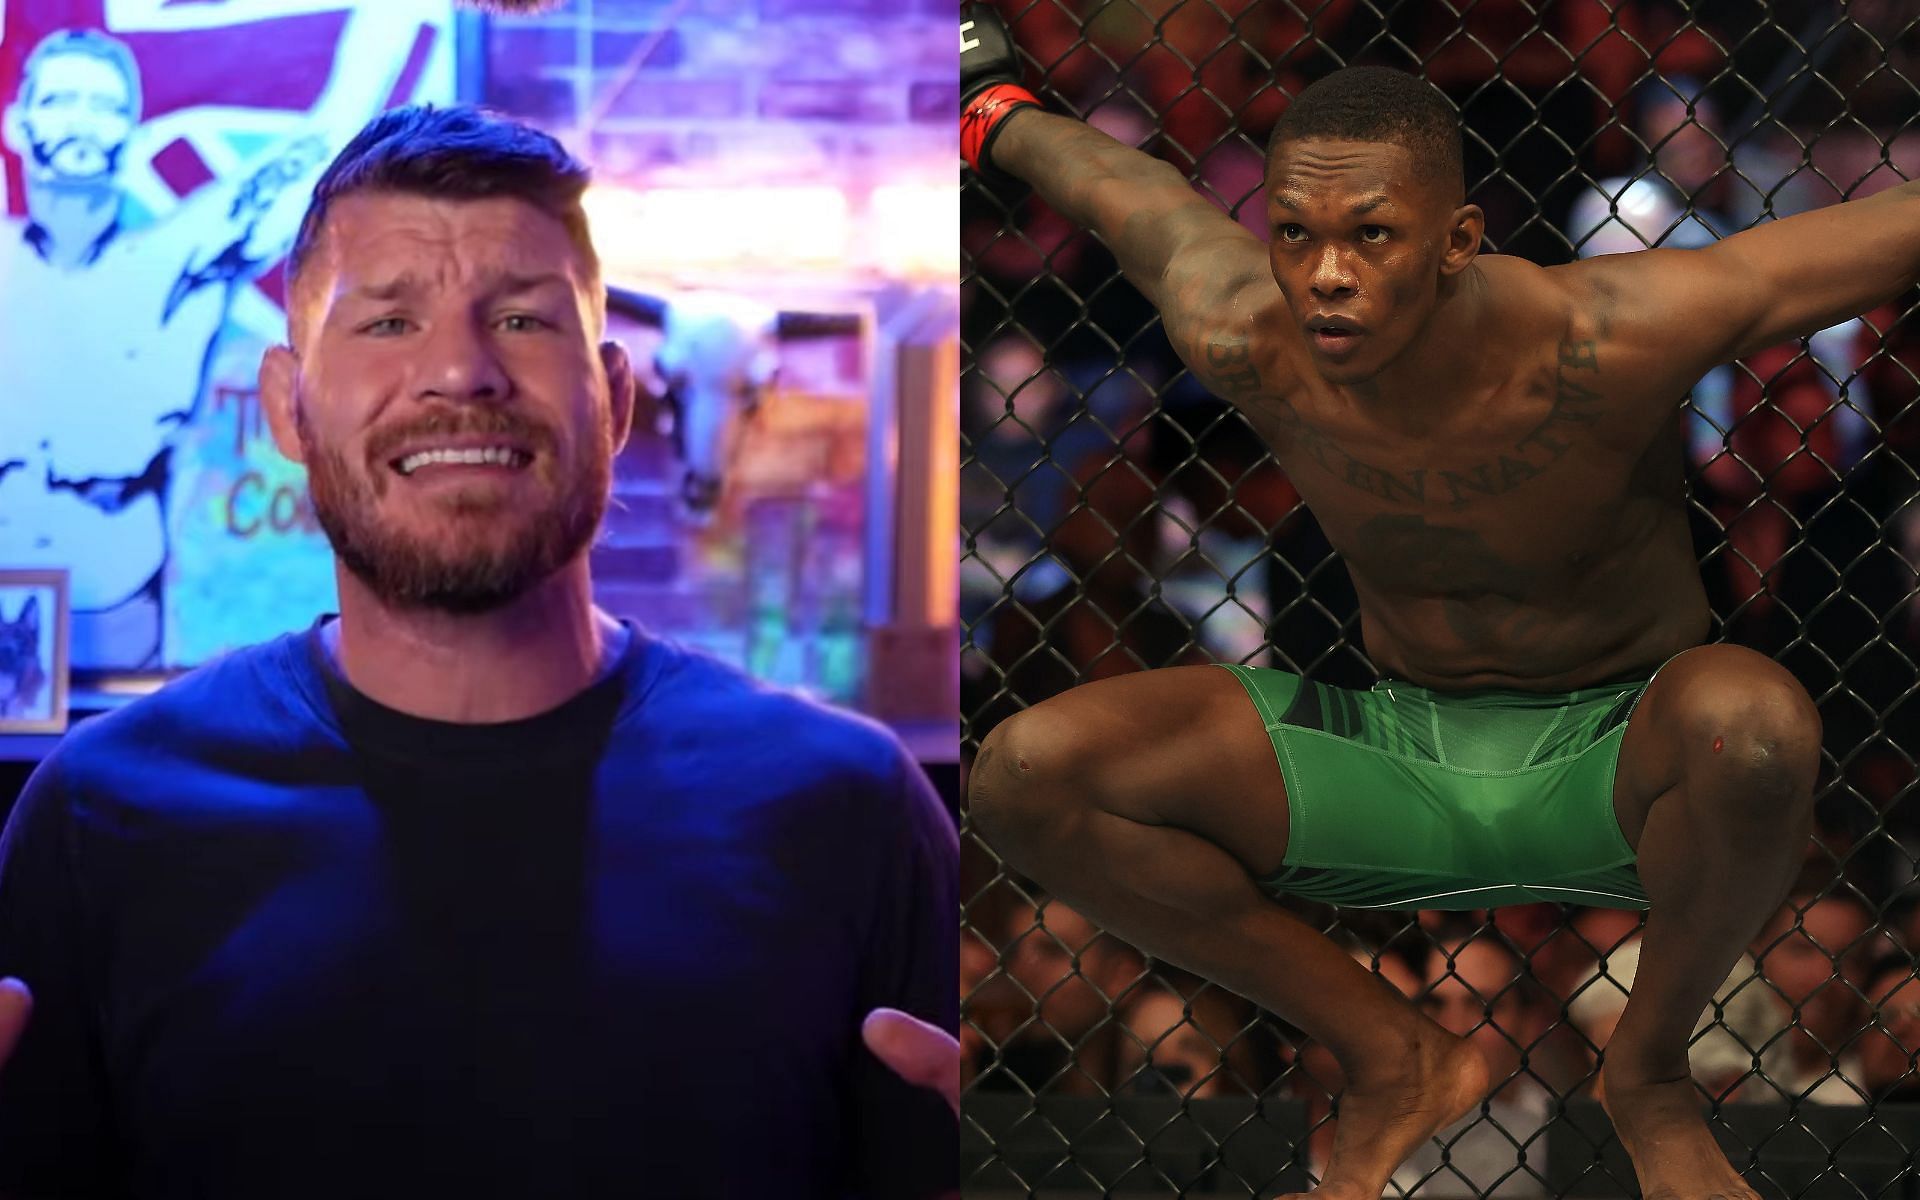 Michael Bisping (left), Israel Adesanya (right) [Image courtesy of Michael Bisping on YouTube]